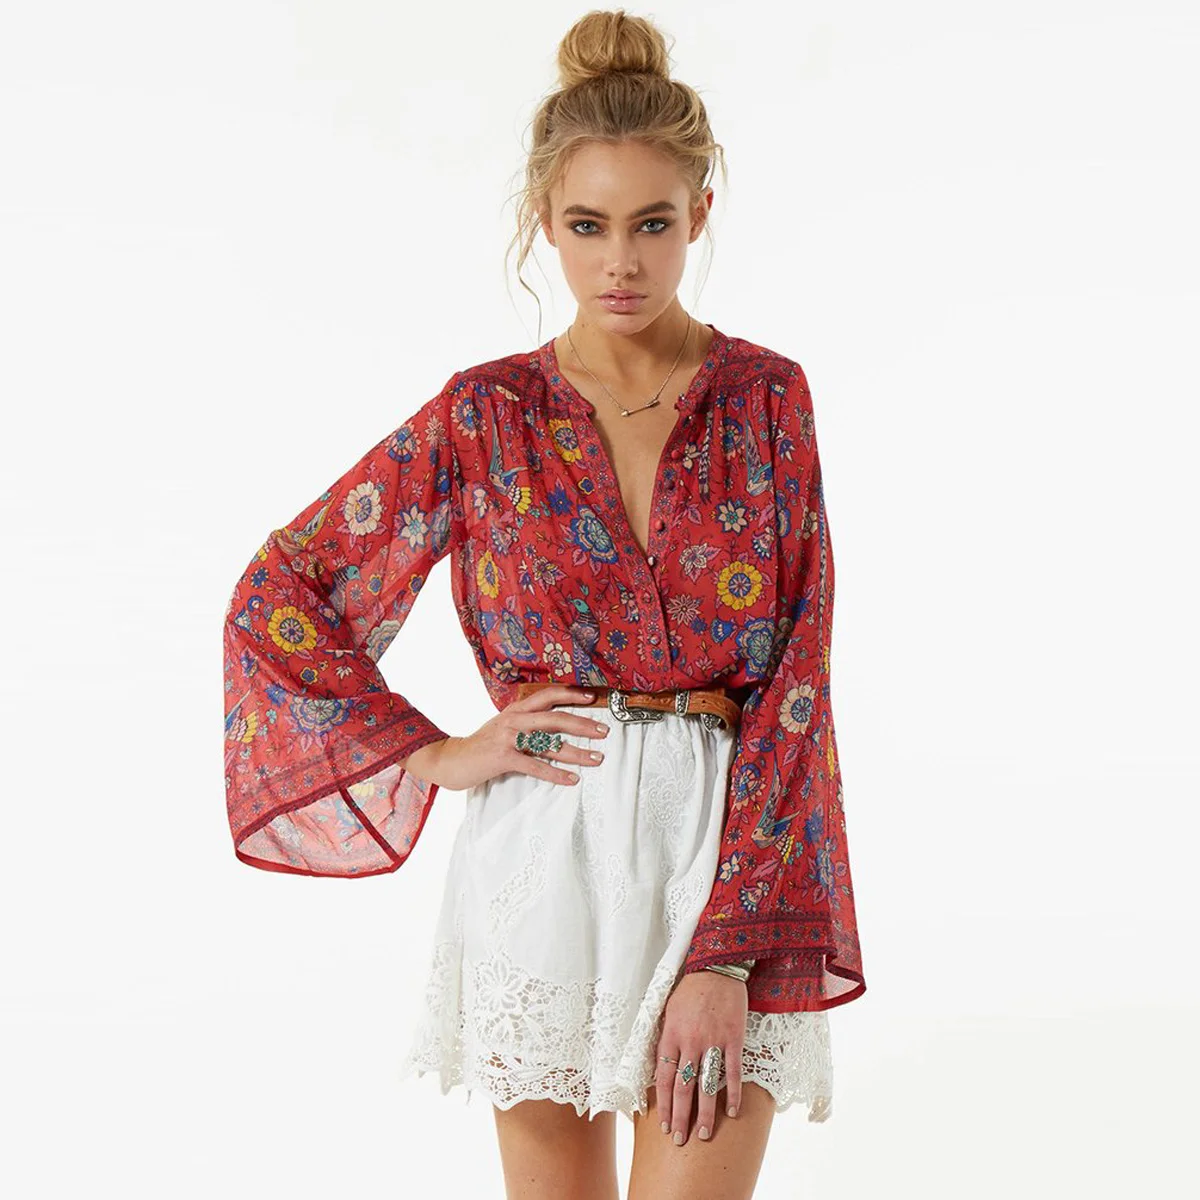 

Jastie O-Neck Long Flare Sleeve Blouses Boho People Hippie Women Top Red Floral Print Shirts Chic Blusas Casual Beach Shirt Tops